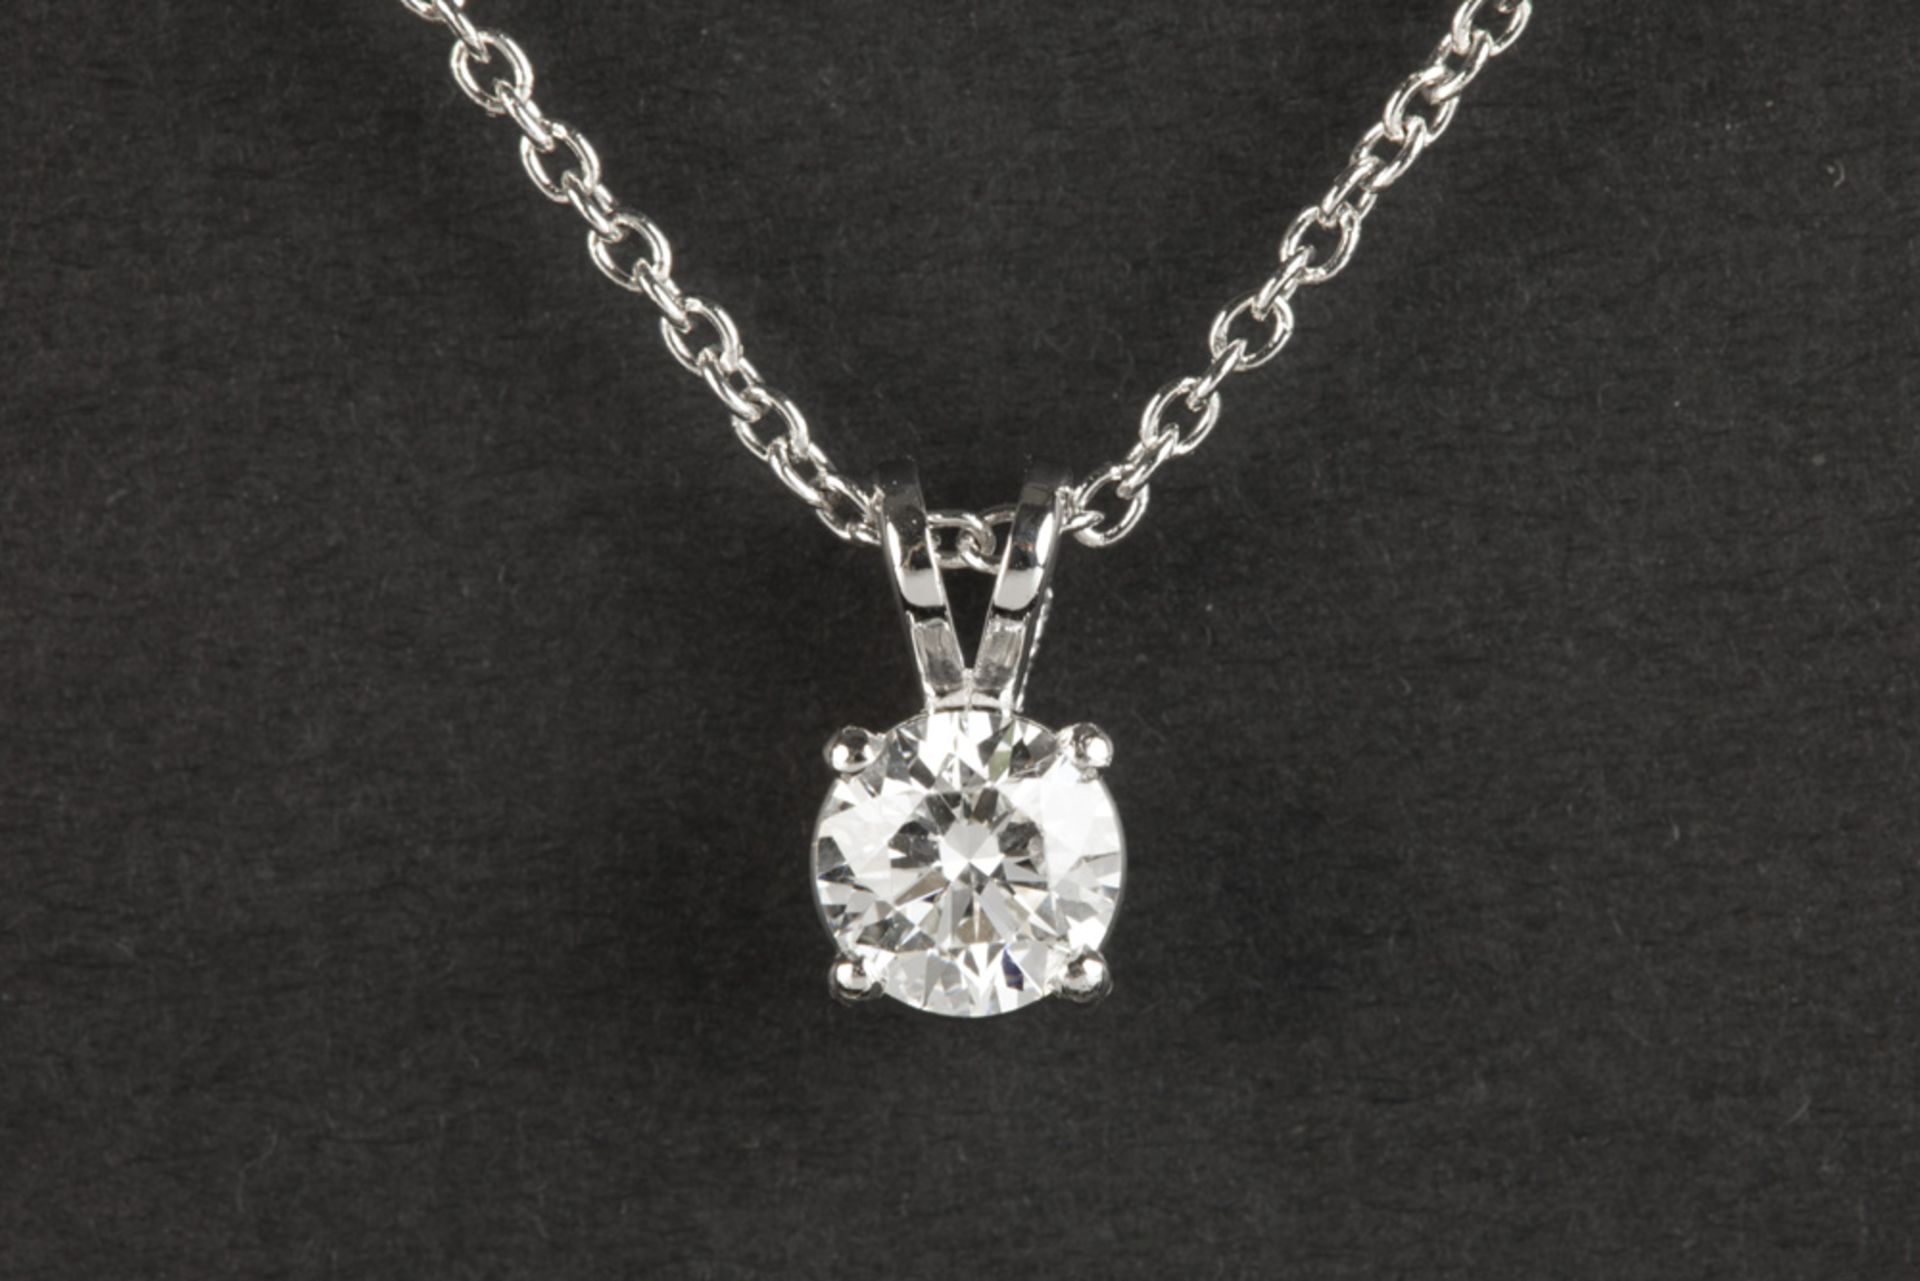 a 0,69 carat CVD high quality brilliant cut diamond set in a pendant with its chain in white gold (